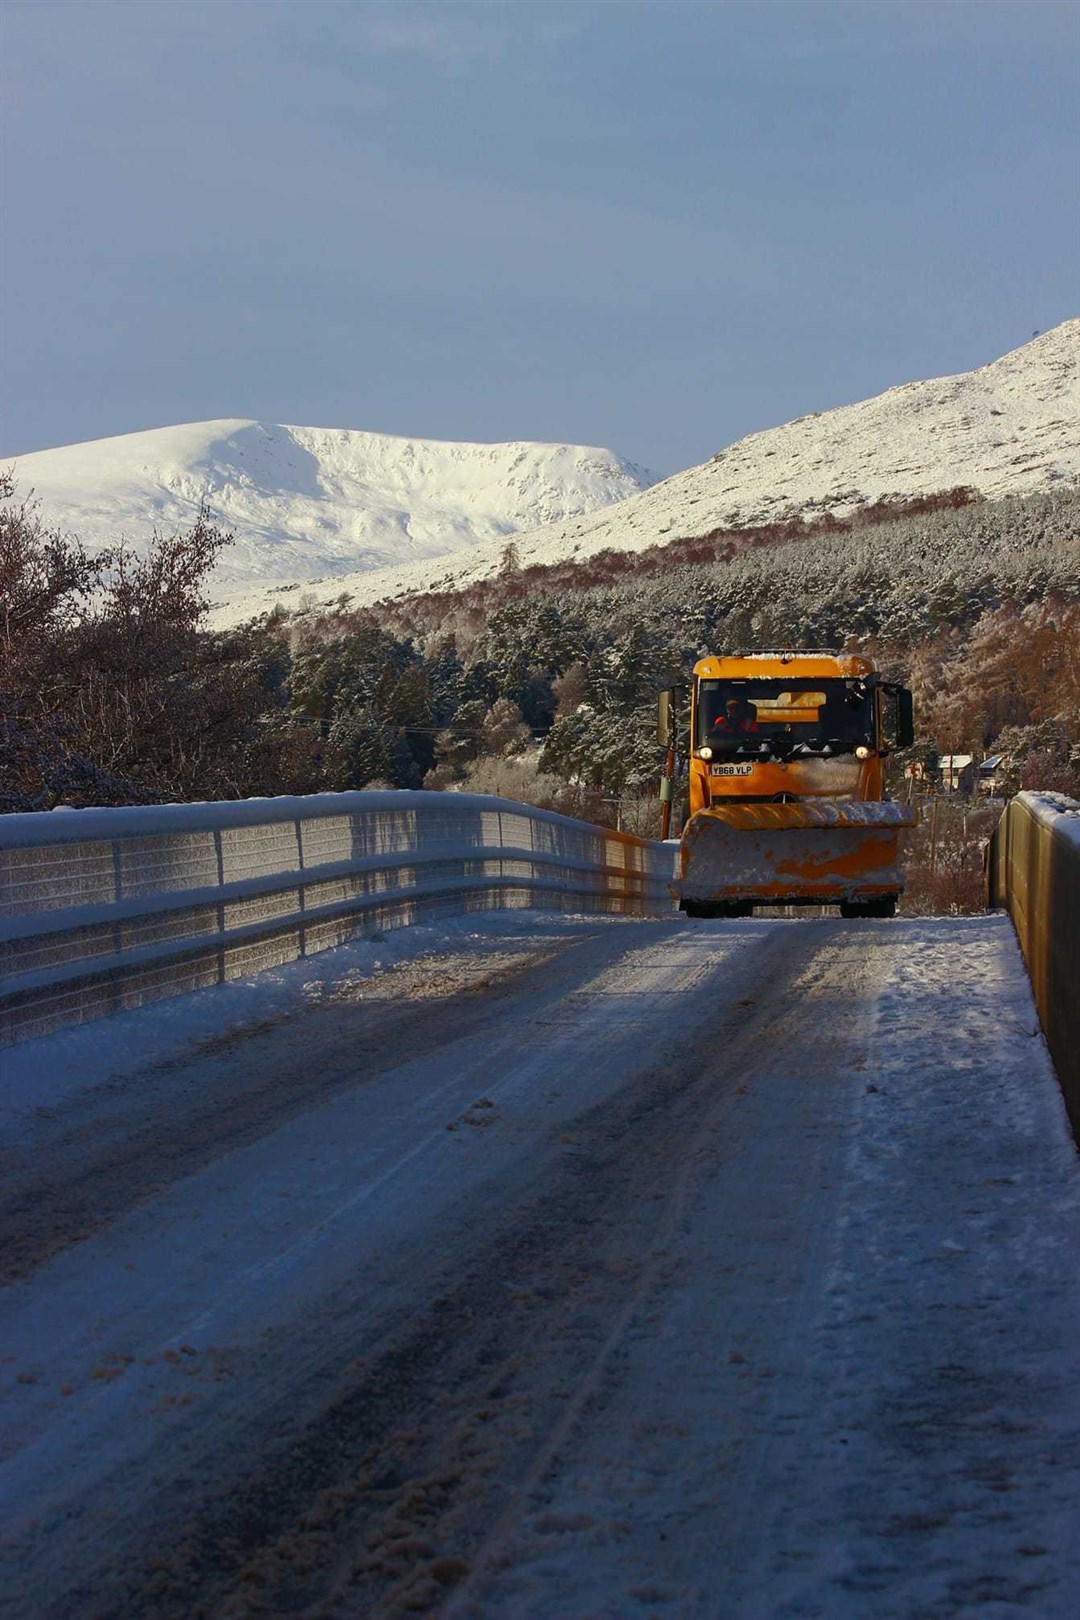 Highland Council roads teams are working to keep roads safe according to an agreed priority.